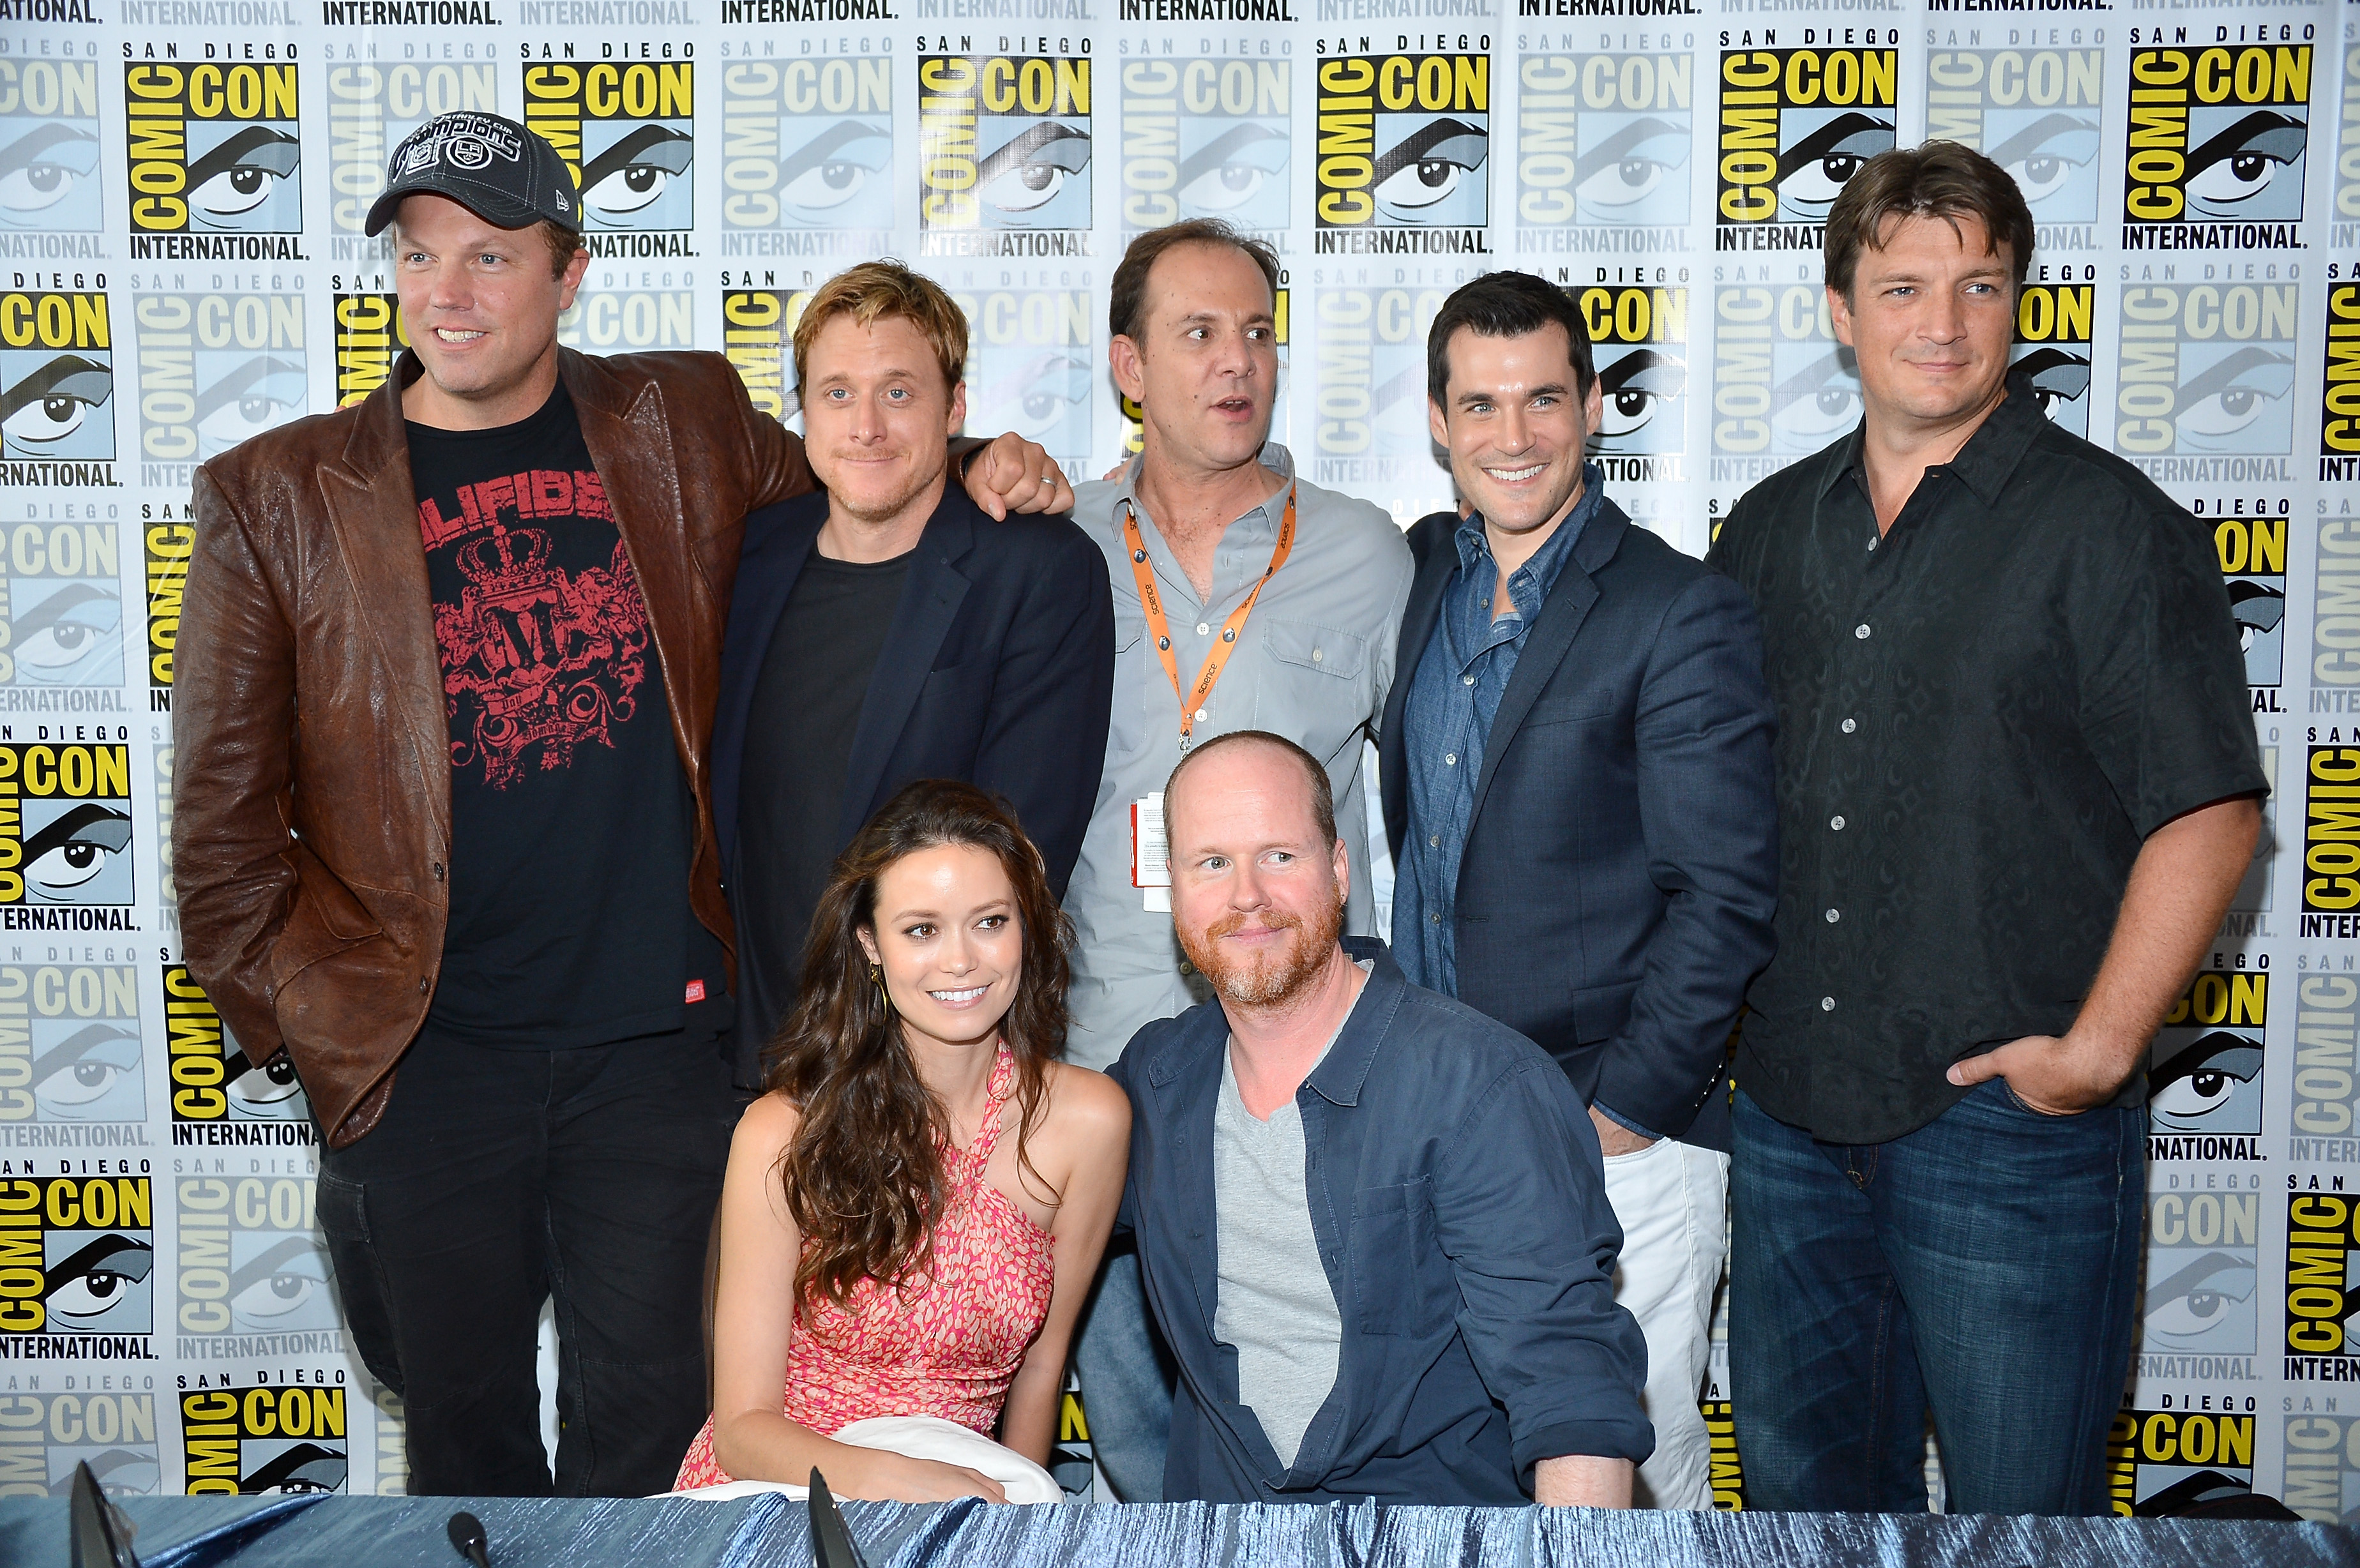 Fox might bring back Firefly if Joss Whedon signs on